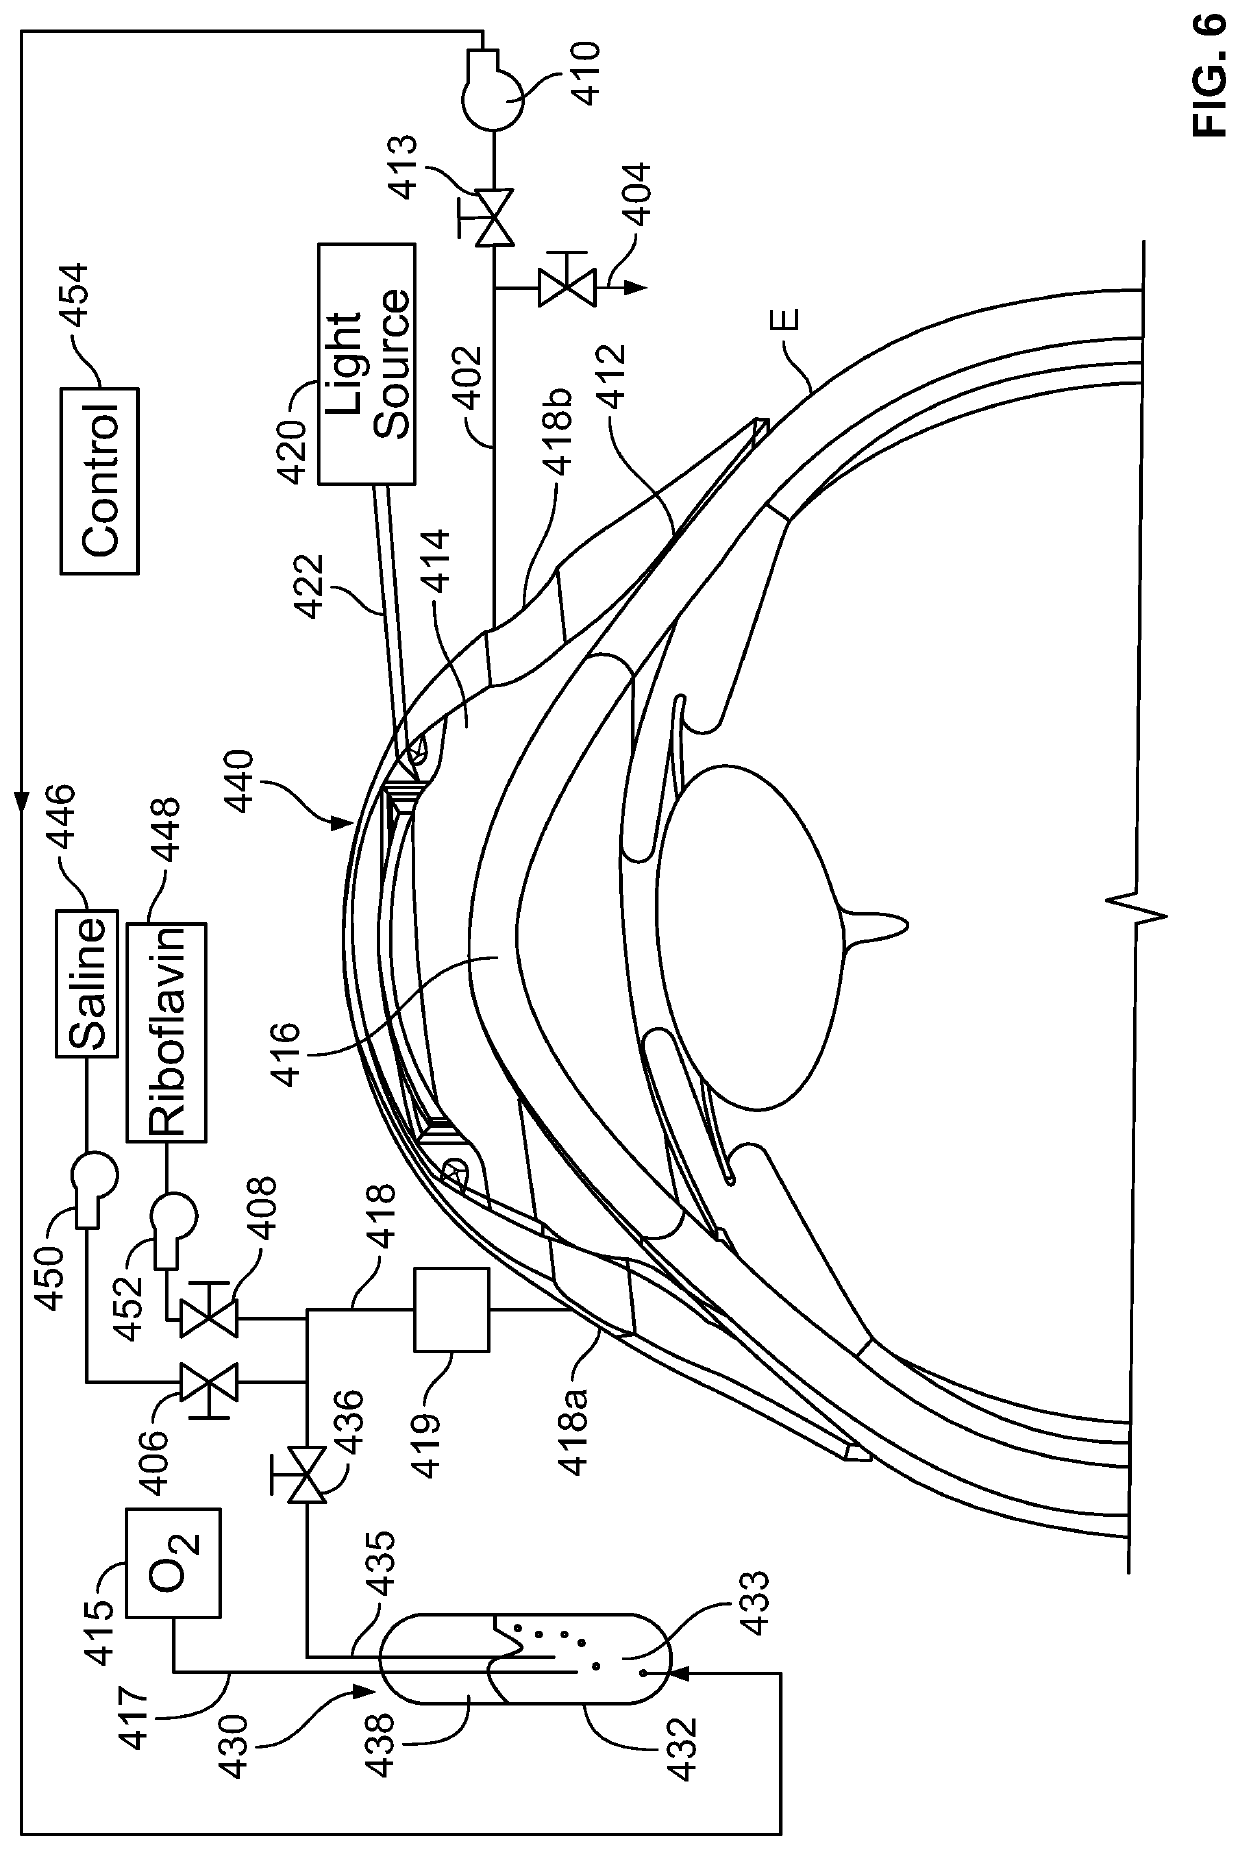 Corneal Crosslinking With Catalyst Distribution Control